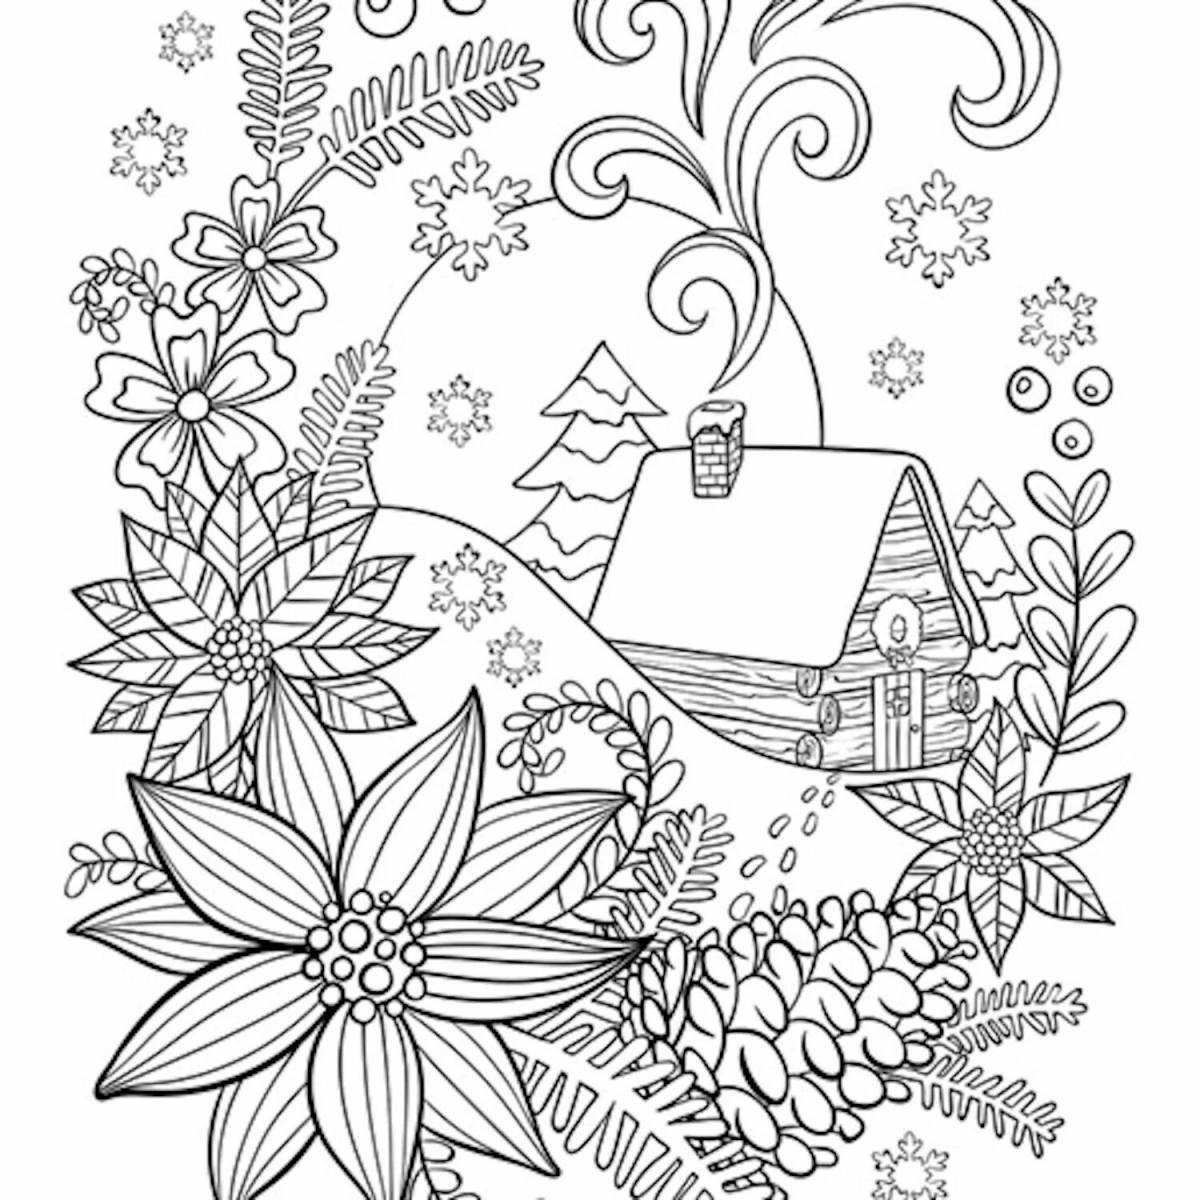 Radiant coloring page antistress christmas